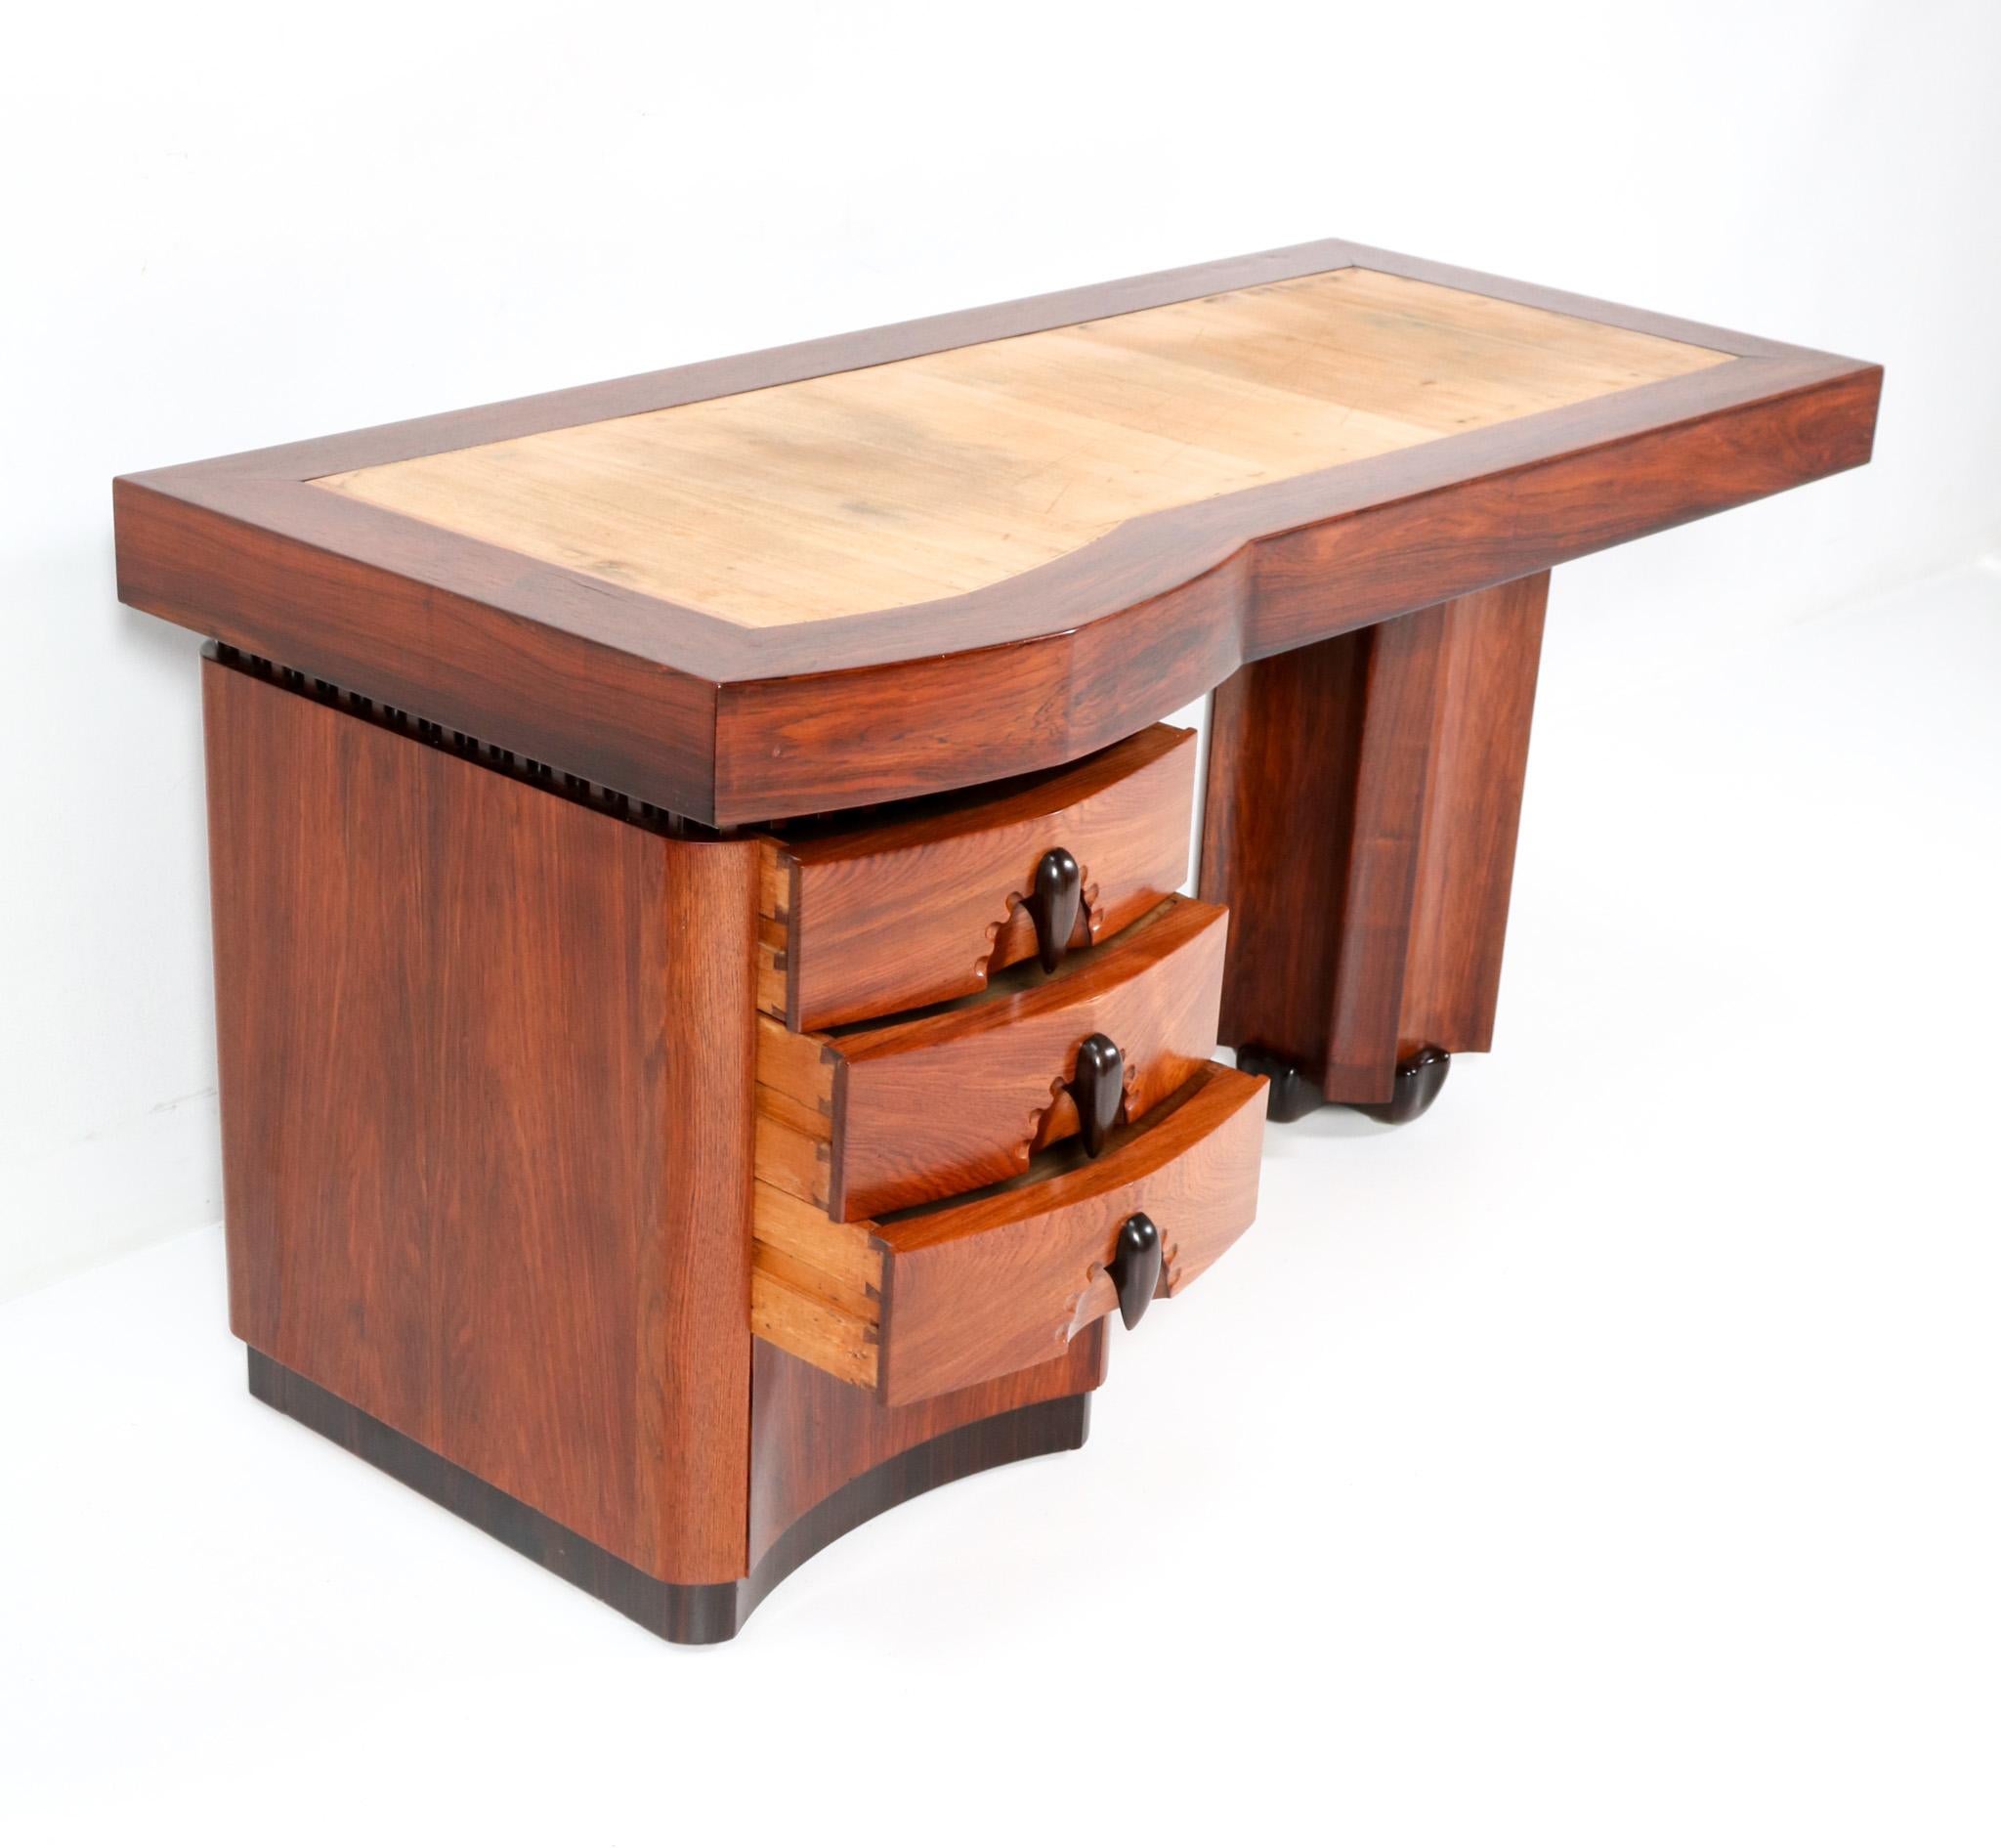 Early 20th Century Padouk Art Deco Amsterdamse School Desk or Writing Table by F.A. Warners, 1925